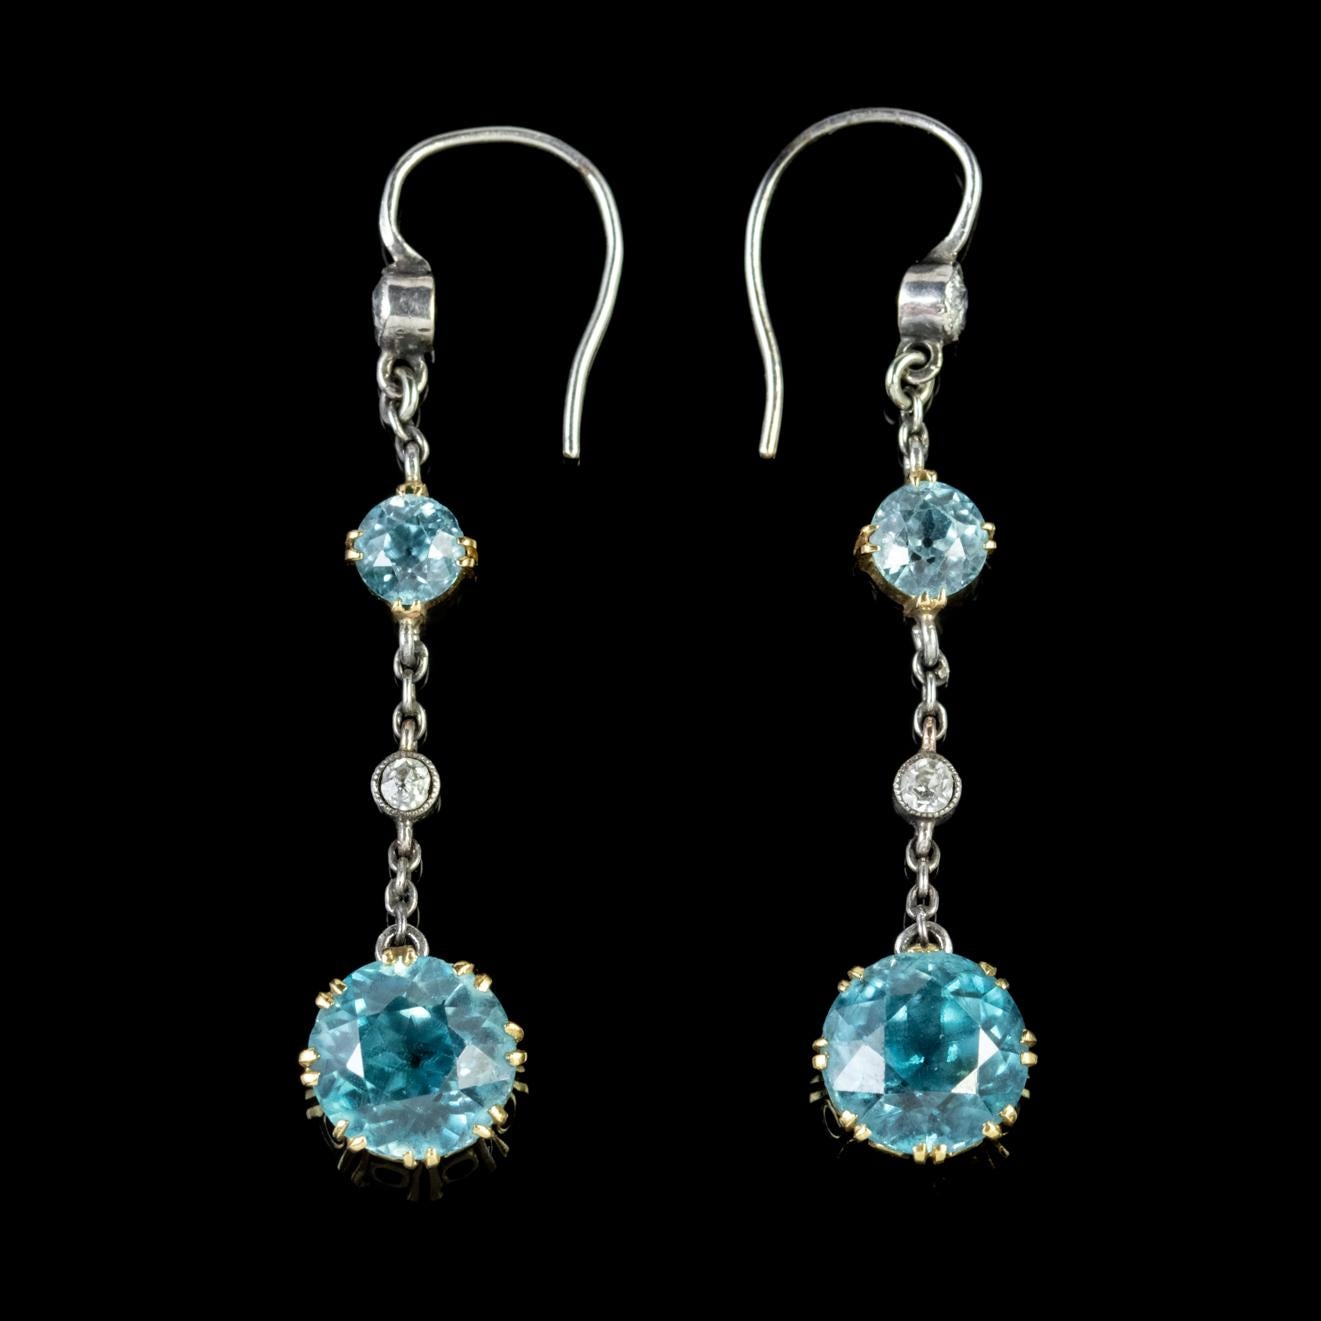 A fabulous pair of antique Edwardian drop earrings adorned with two Diamonds and two Blue Zircons. The largest Zircon is a beautiful 1.70ct stone with a smaller 0.25ct stone sat above. 

Blue Zircon is a lovely shade of teal/ blue and was once said